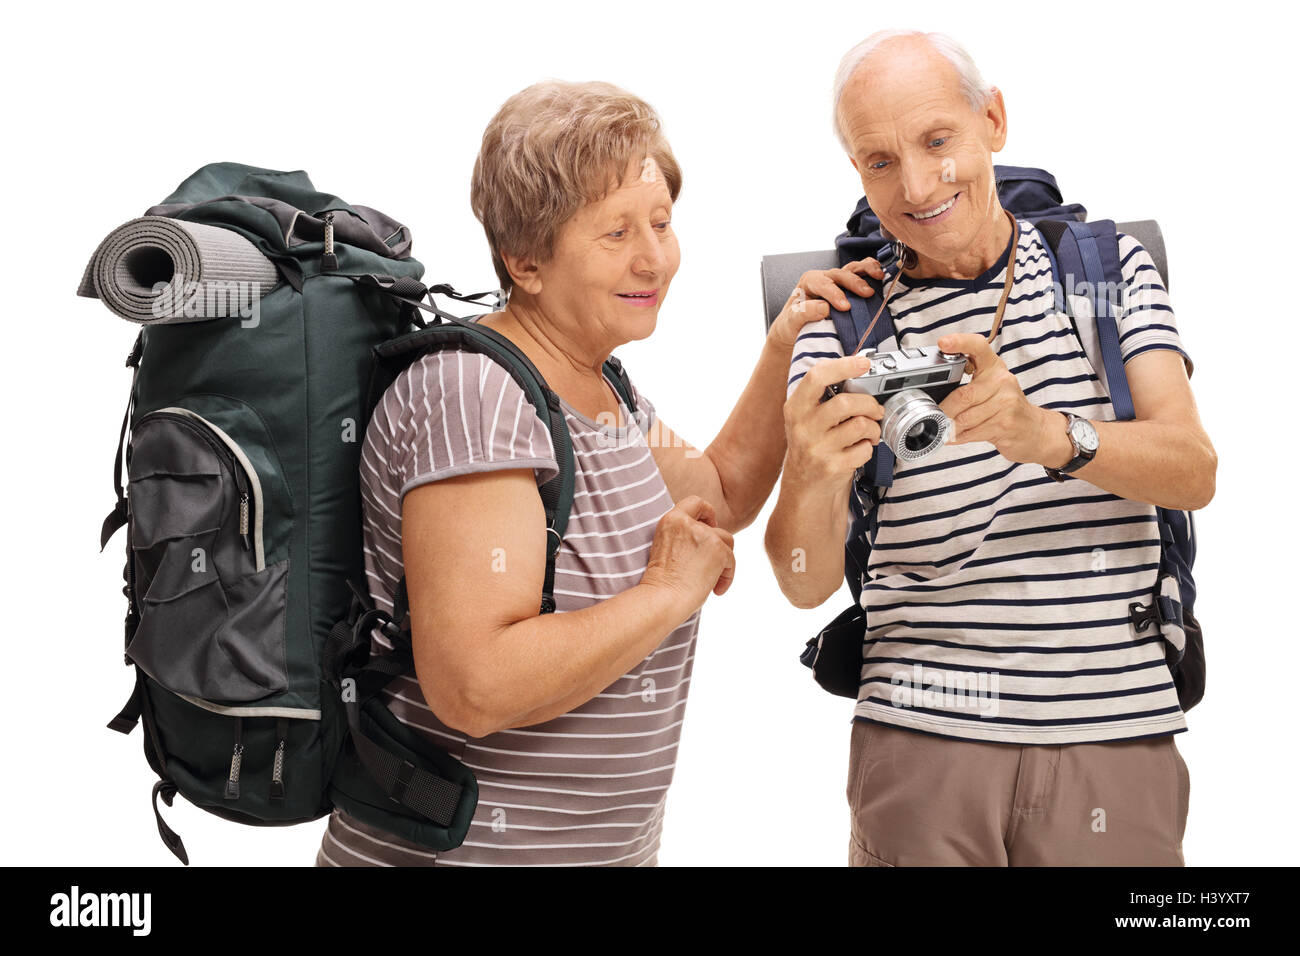 Senior hikers looking at a photograph on a camera isolated on white background Stock Photo